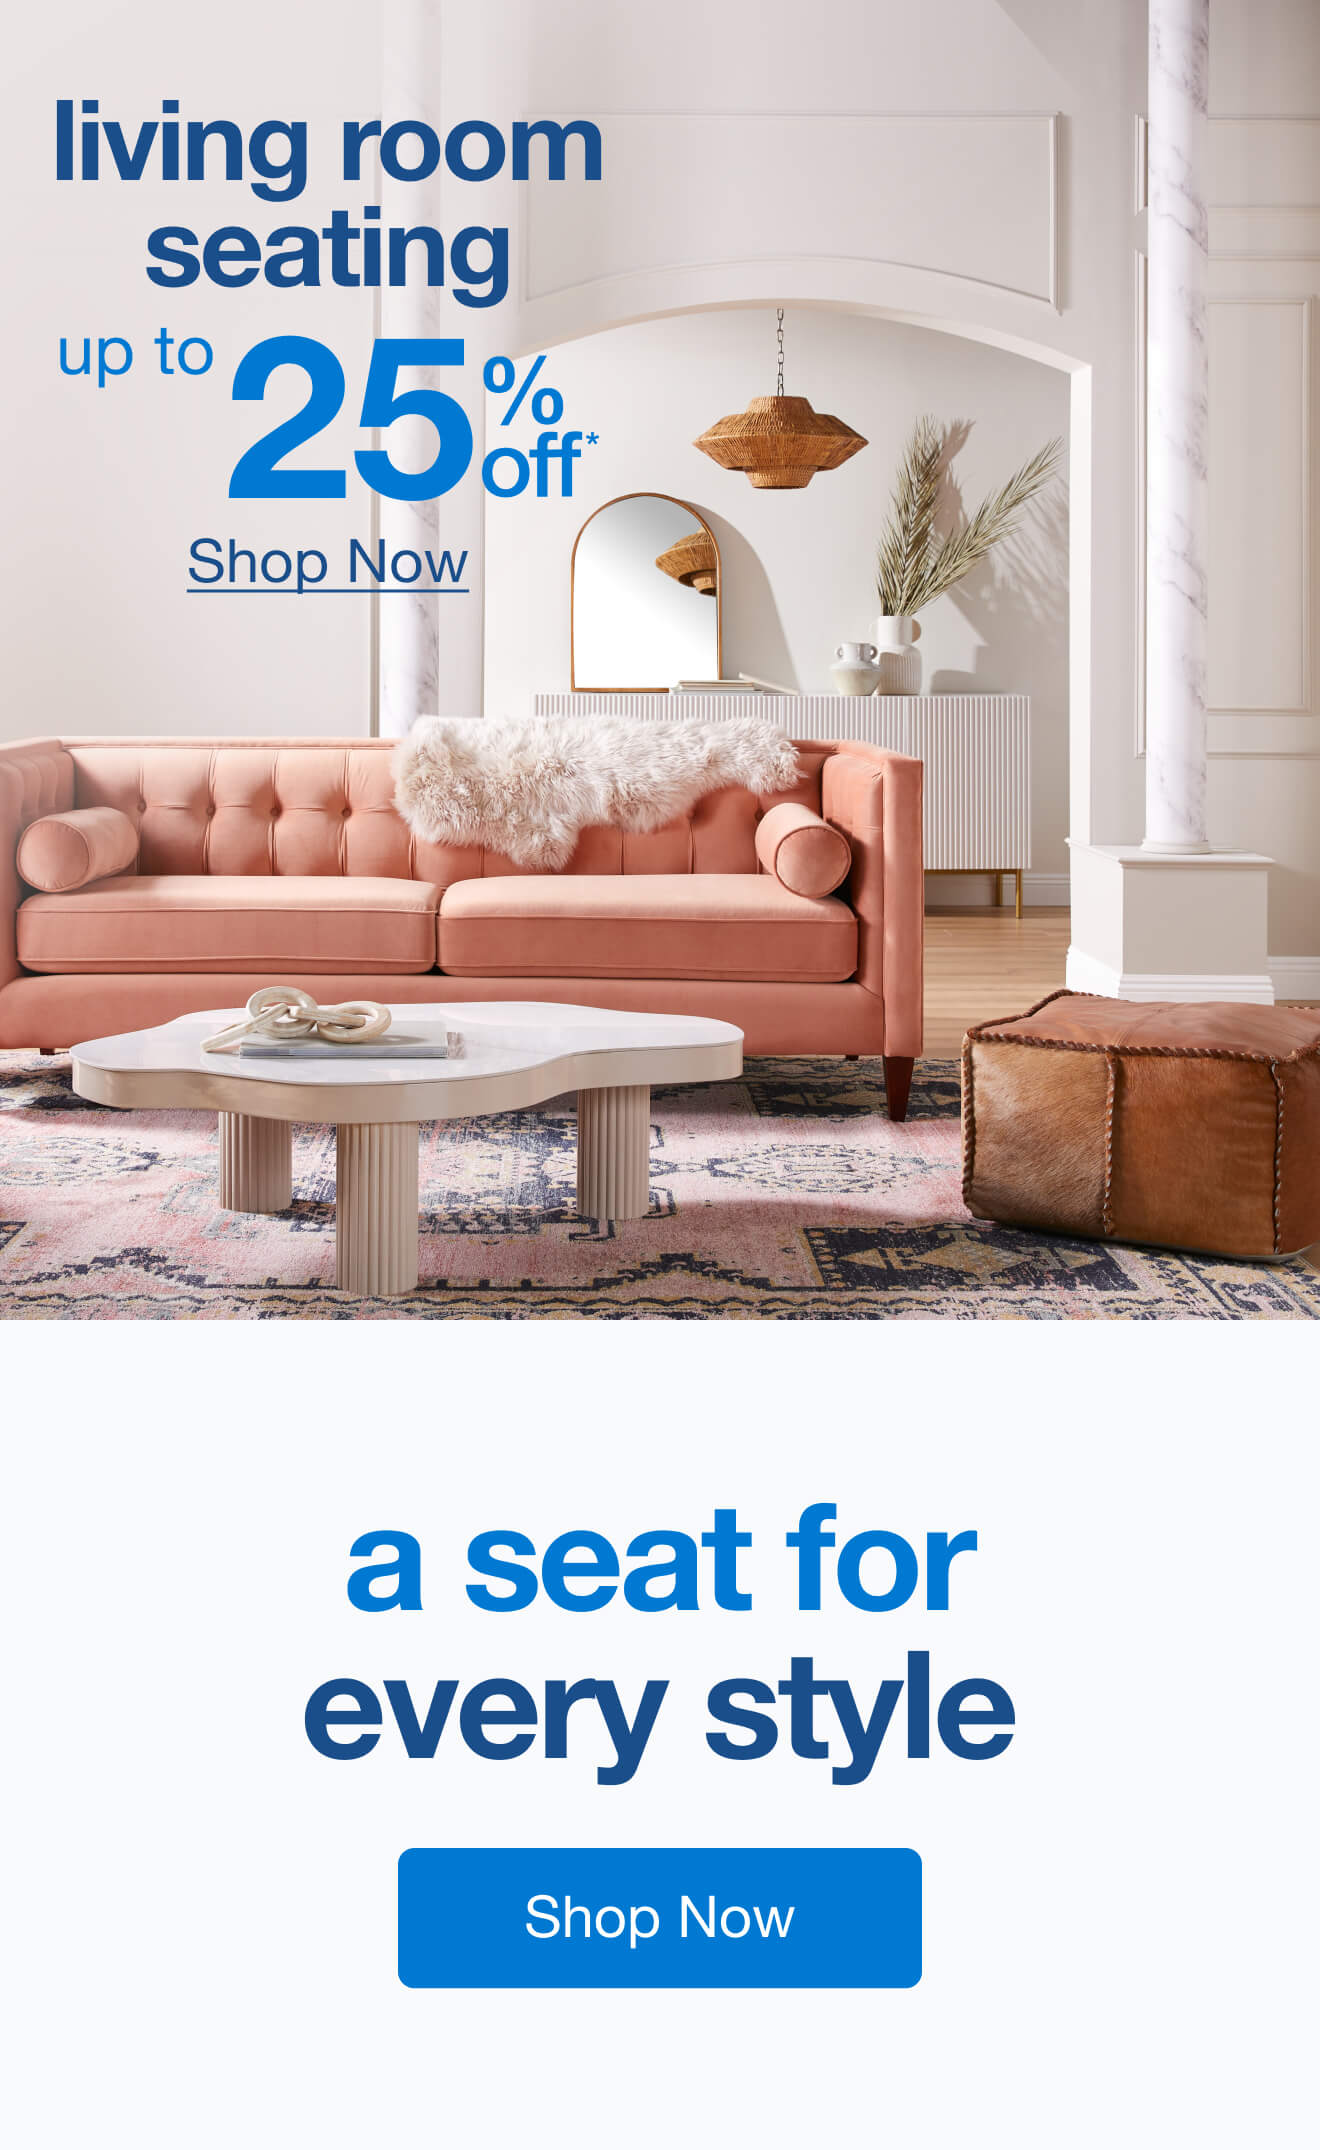 Up to 25% Off* Living Room Seating - Shop Now!